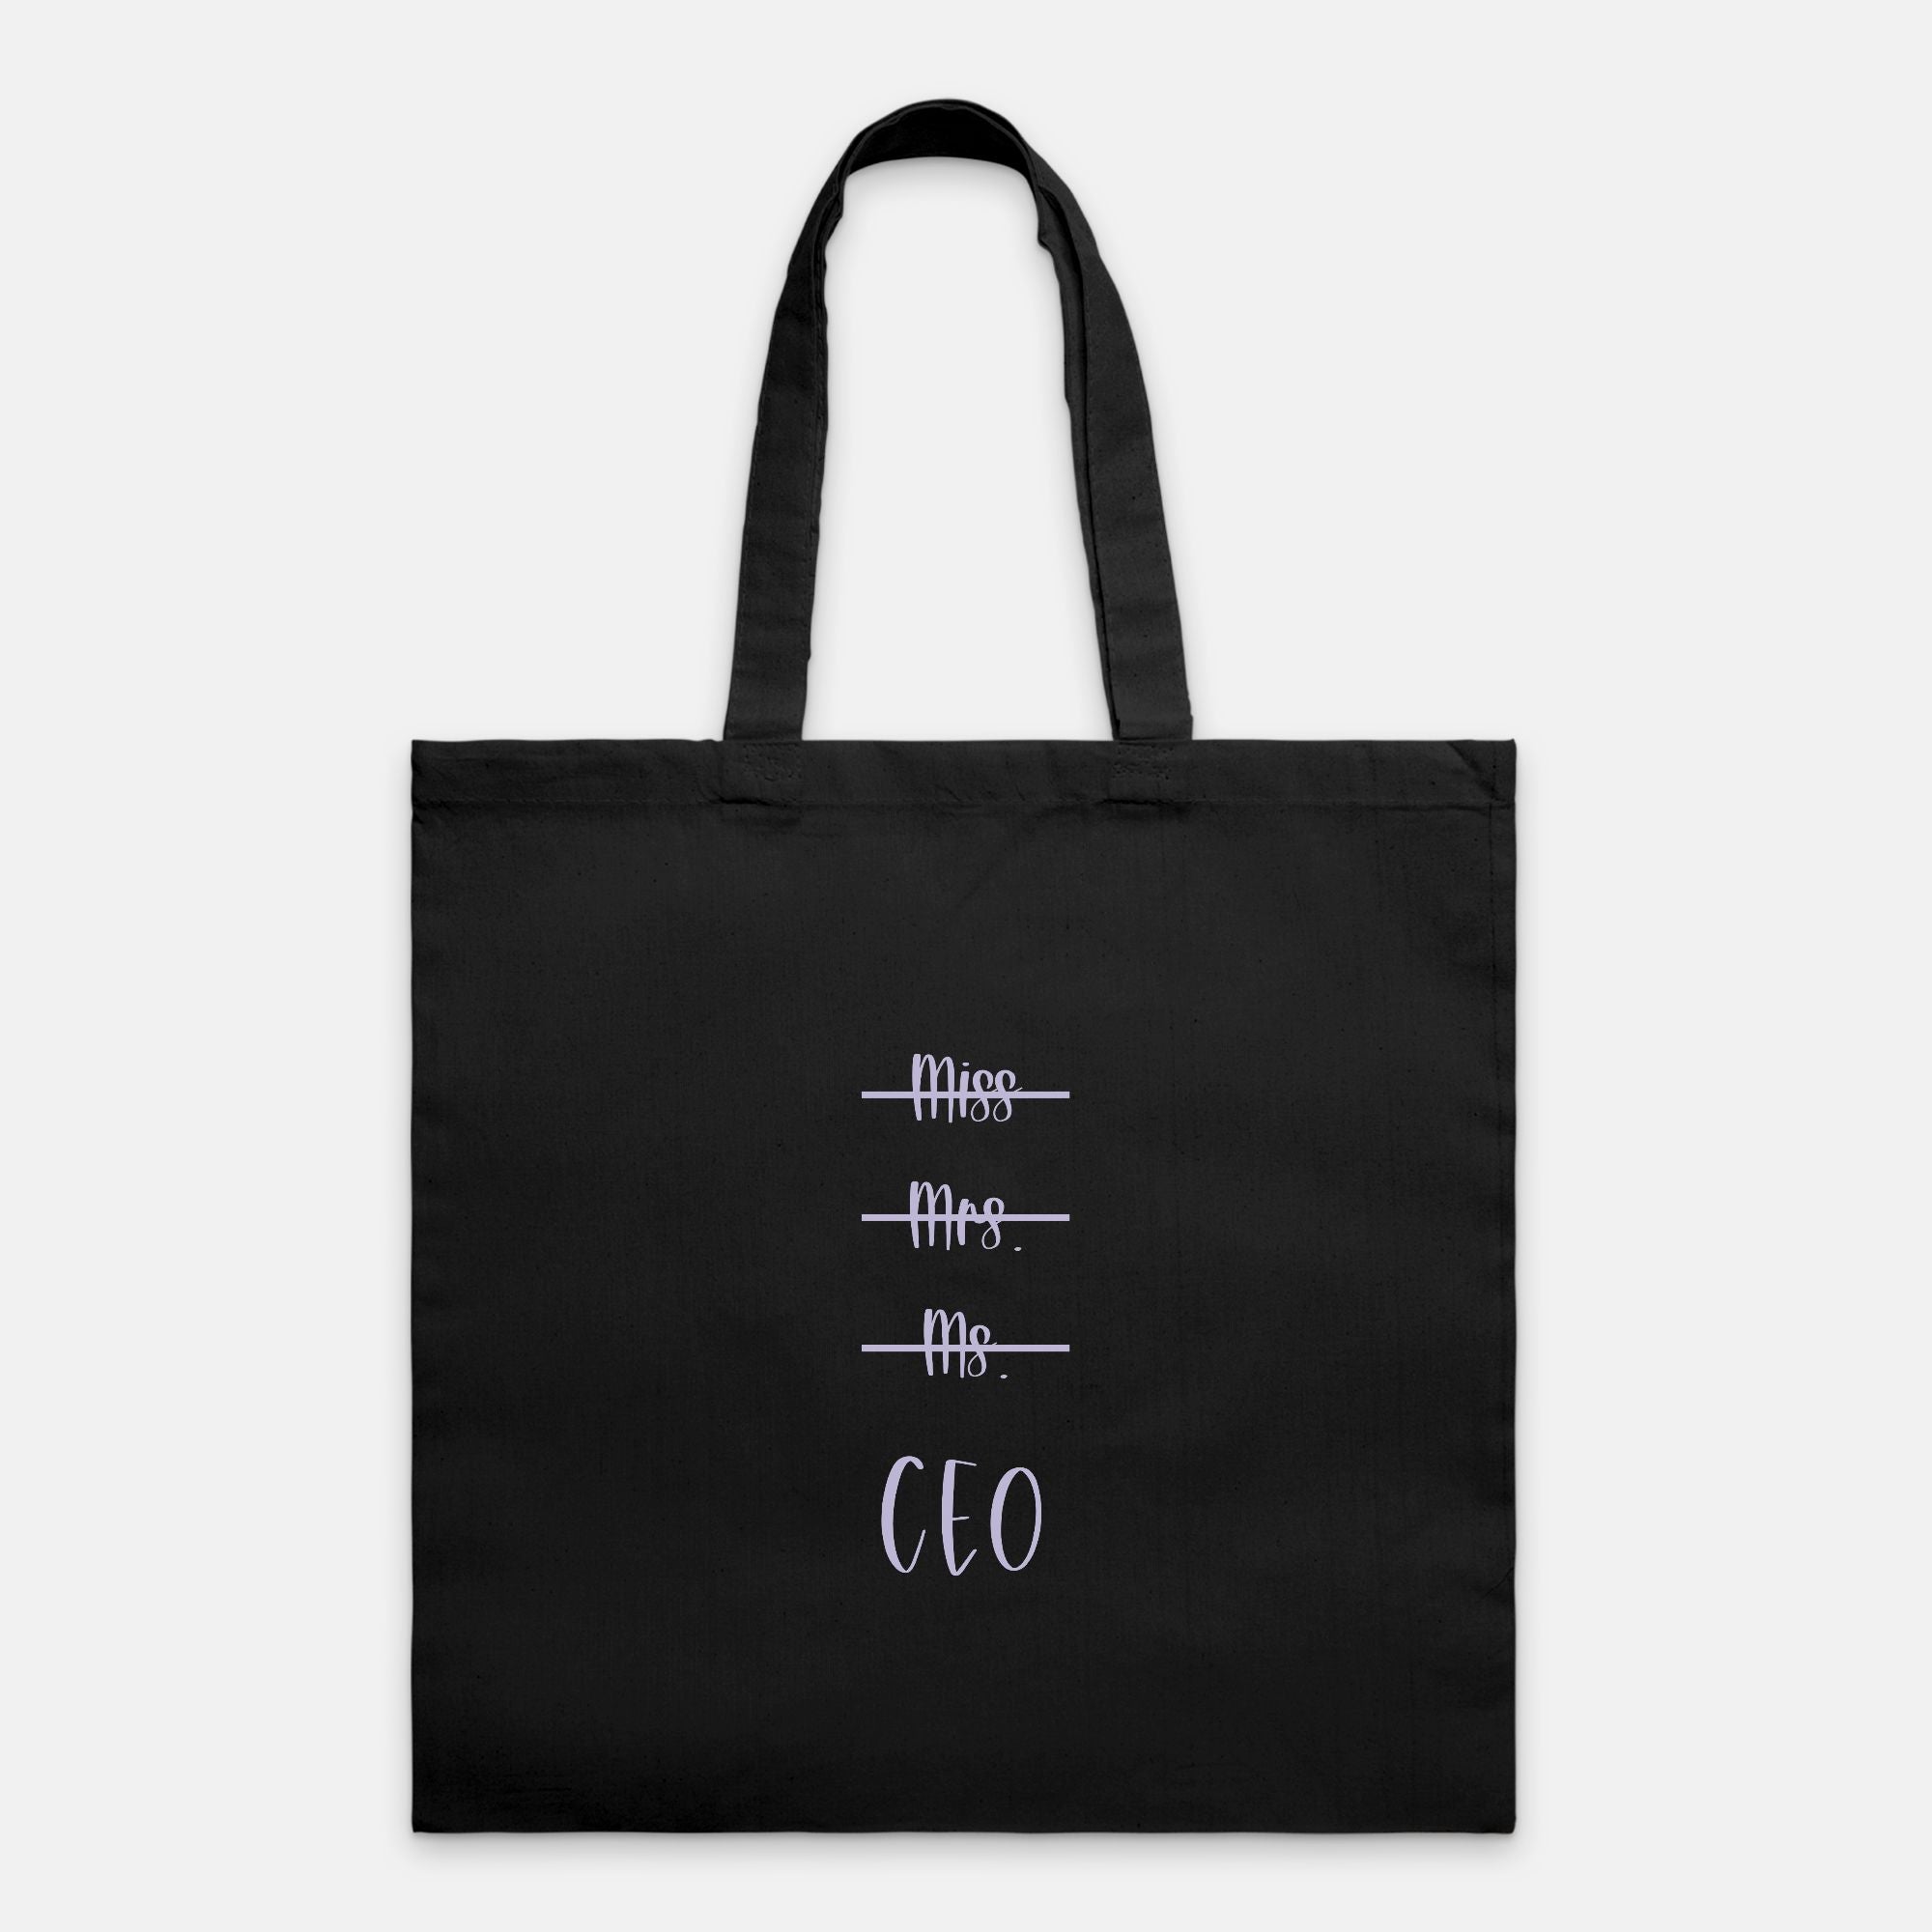 Miss Mrs. Ms. CEO Lightweight Tote Bag